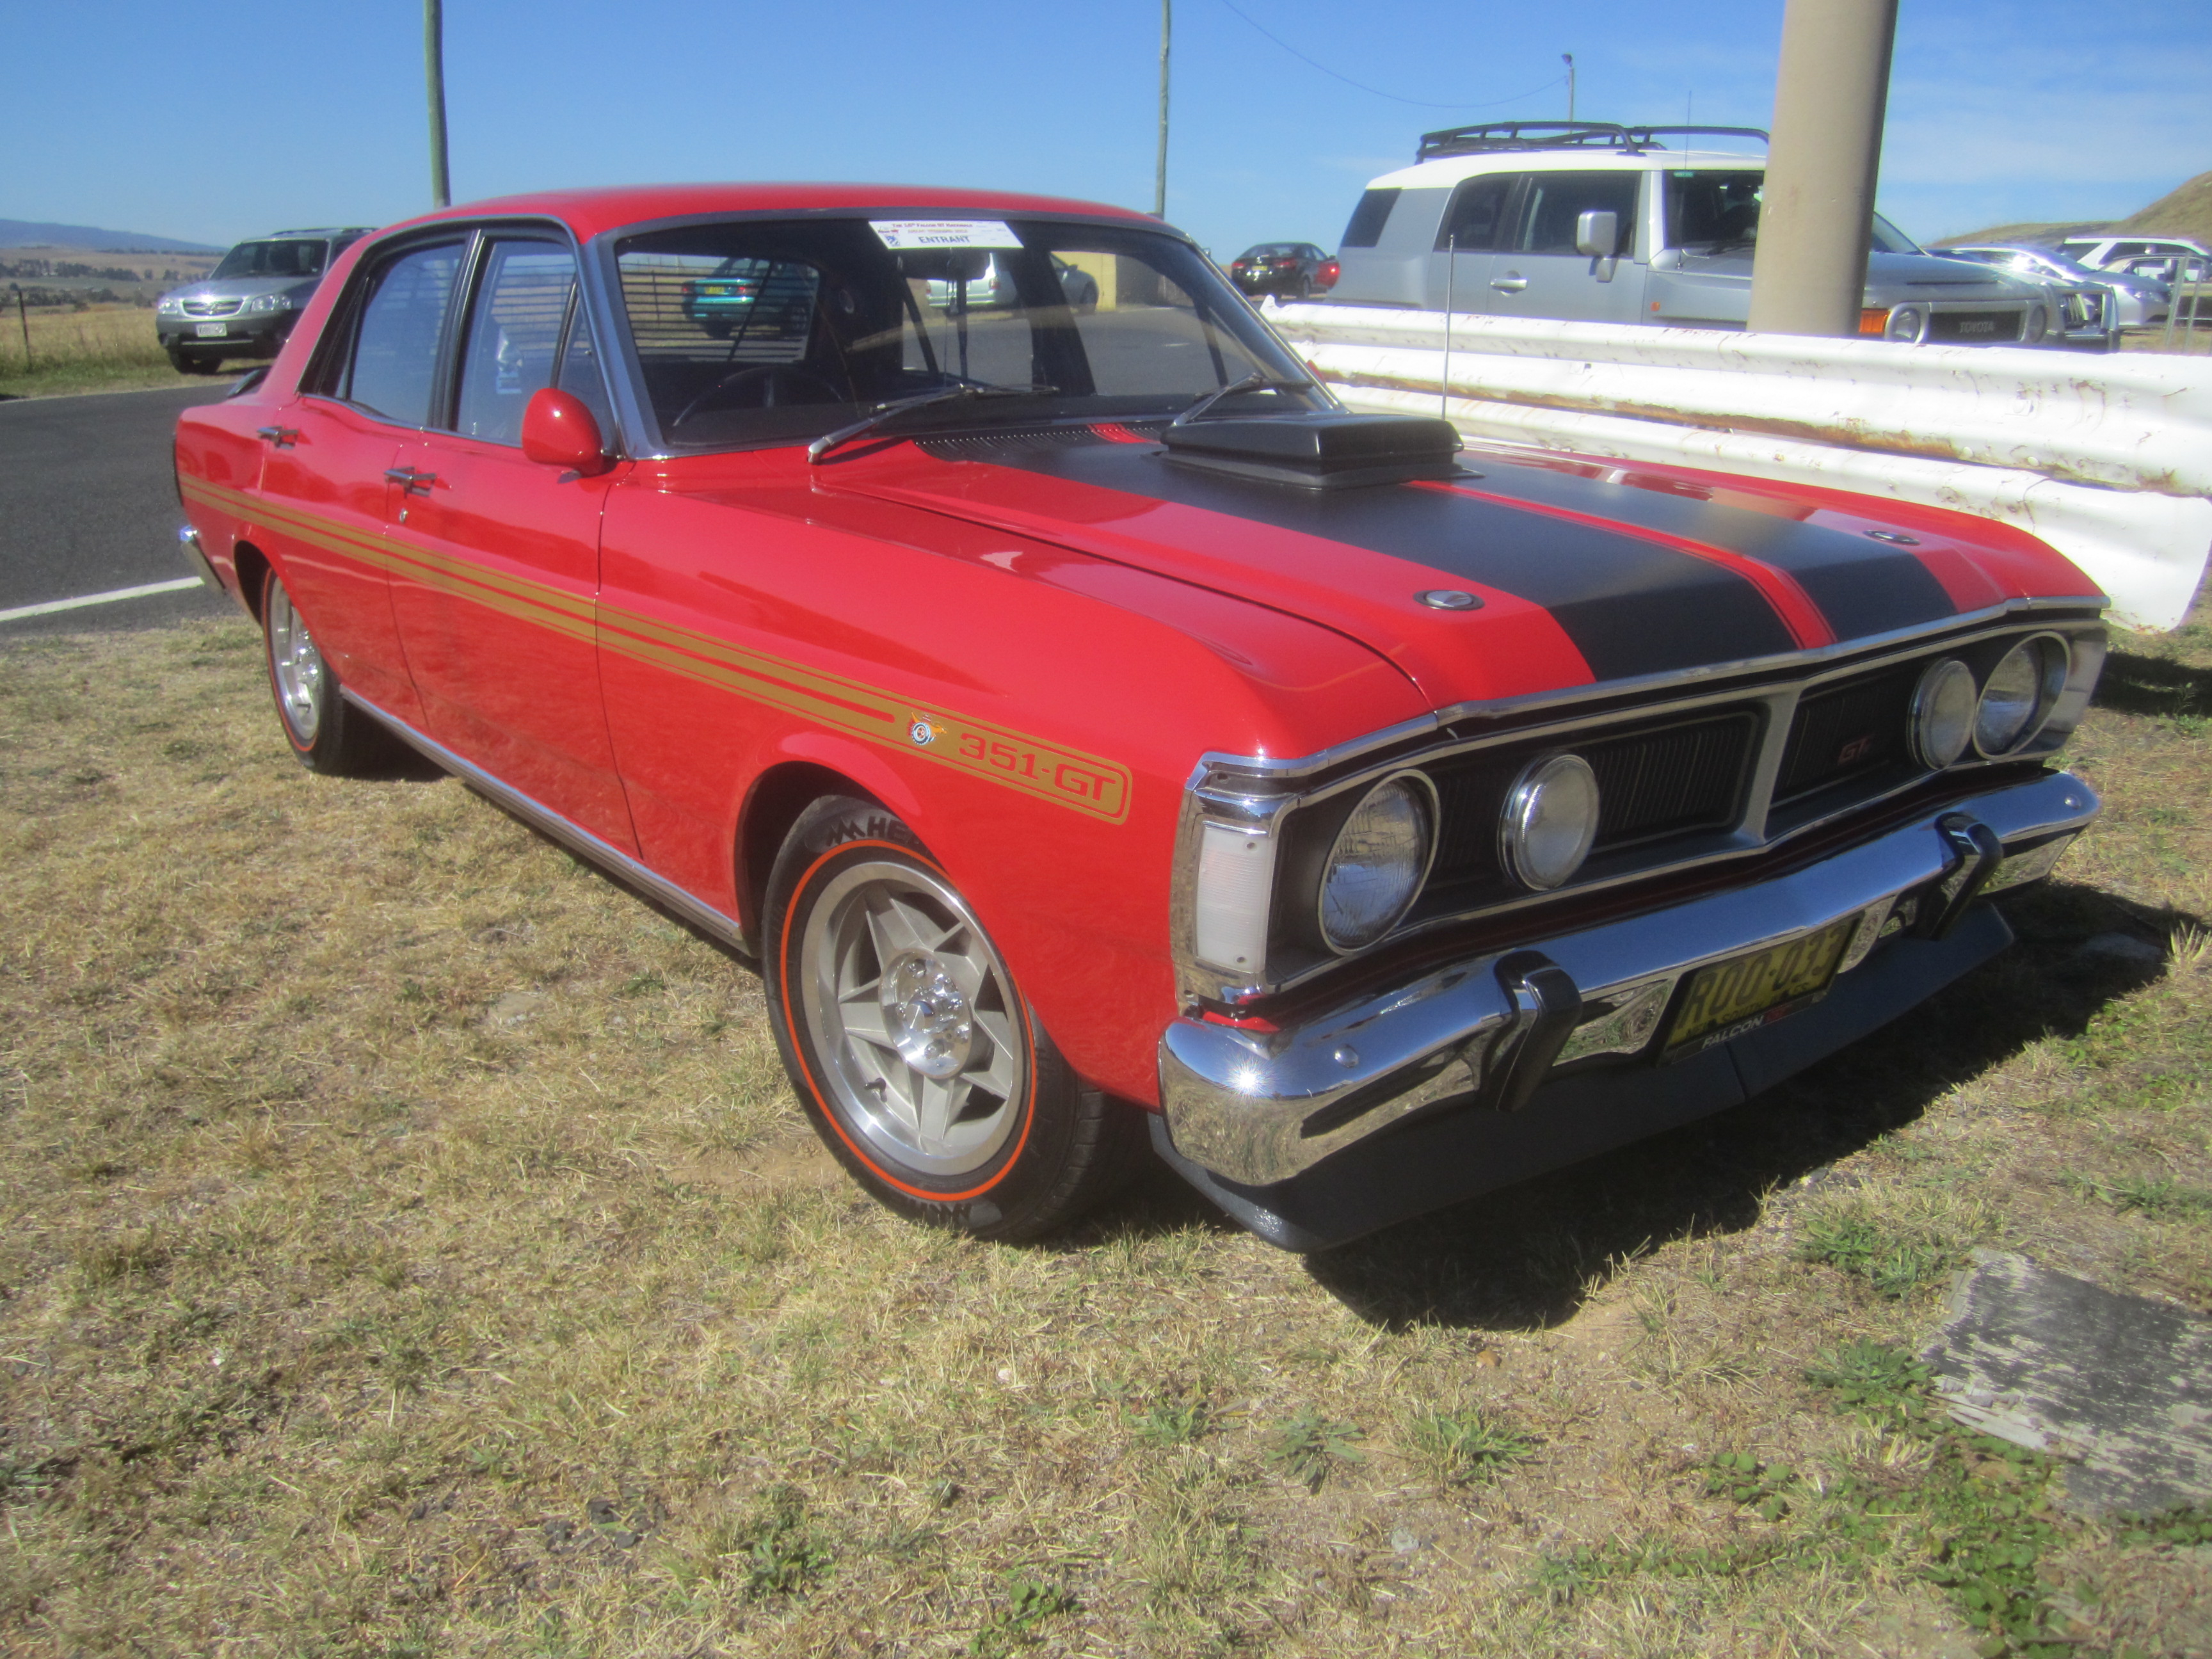 Xy Ford Falcon Phase Iii Gtho Backgrounds, Compatible - PC, Mobile, Gadgets| 3456x2592 px